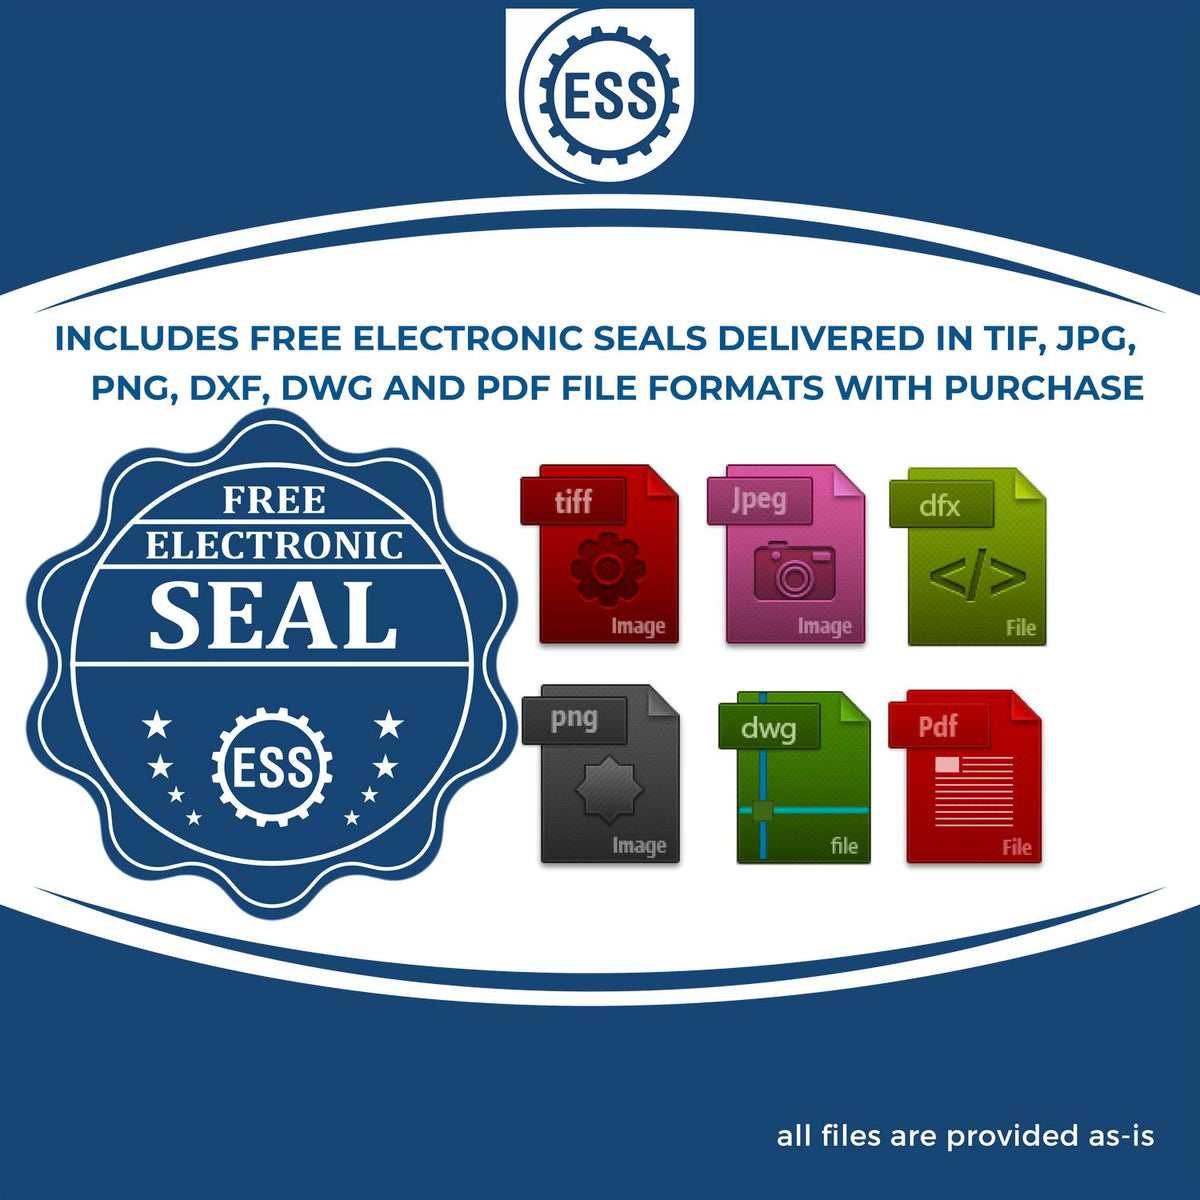 An infographic for the free electronic seal for the Gift New Mexico Geologist Seal illustrating the different file type icons such as DXF, DWG, TIF, JPG and PNG.